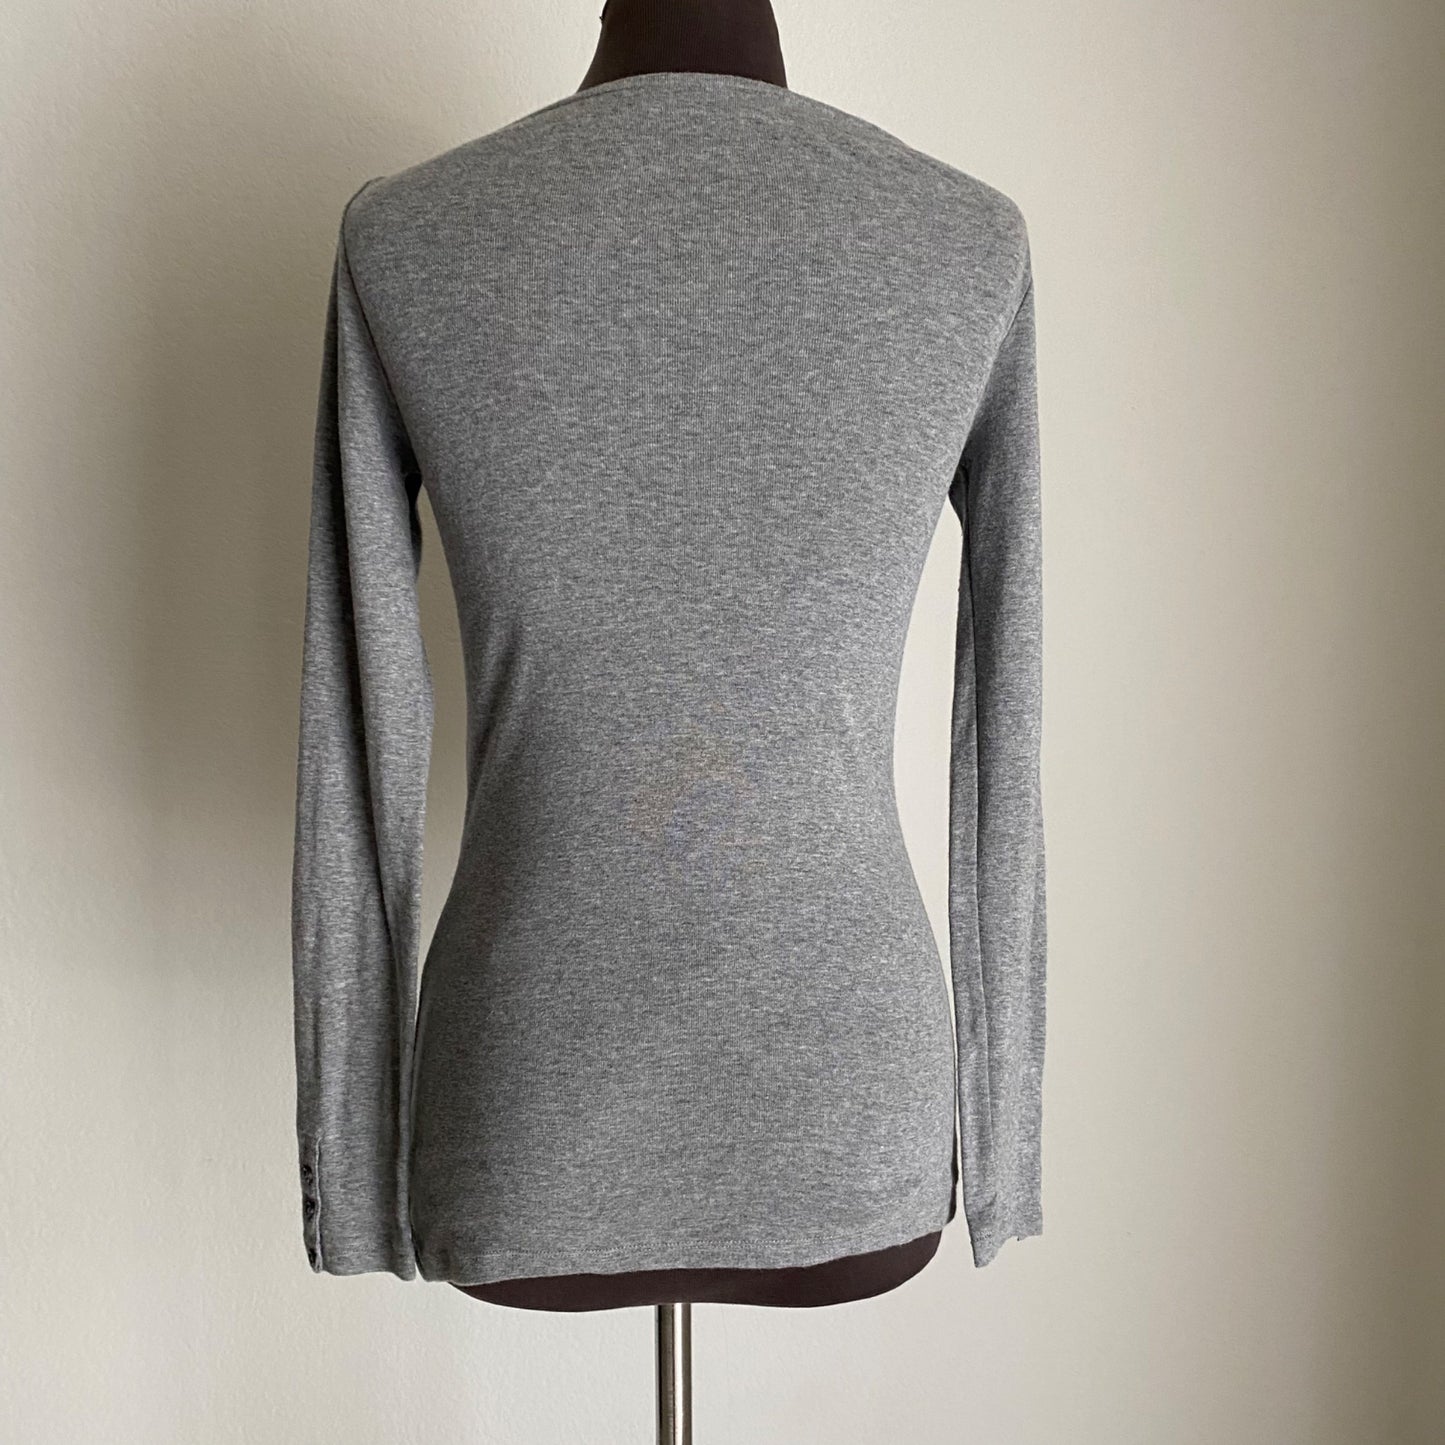 Gap sz XS cotton Long sleeve scoop neck fitted shirt